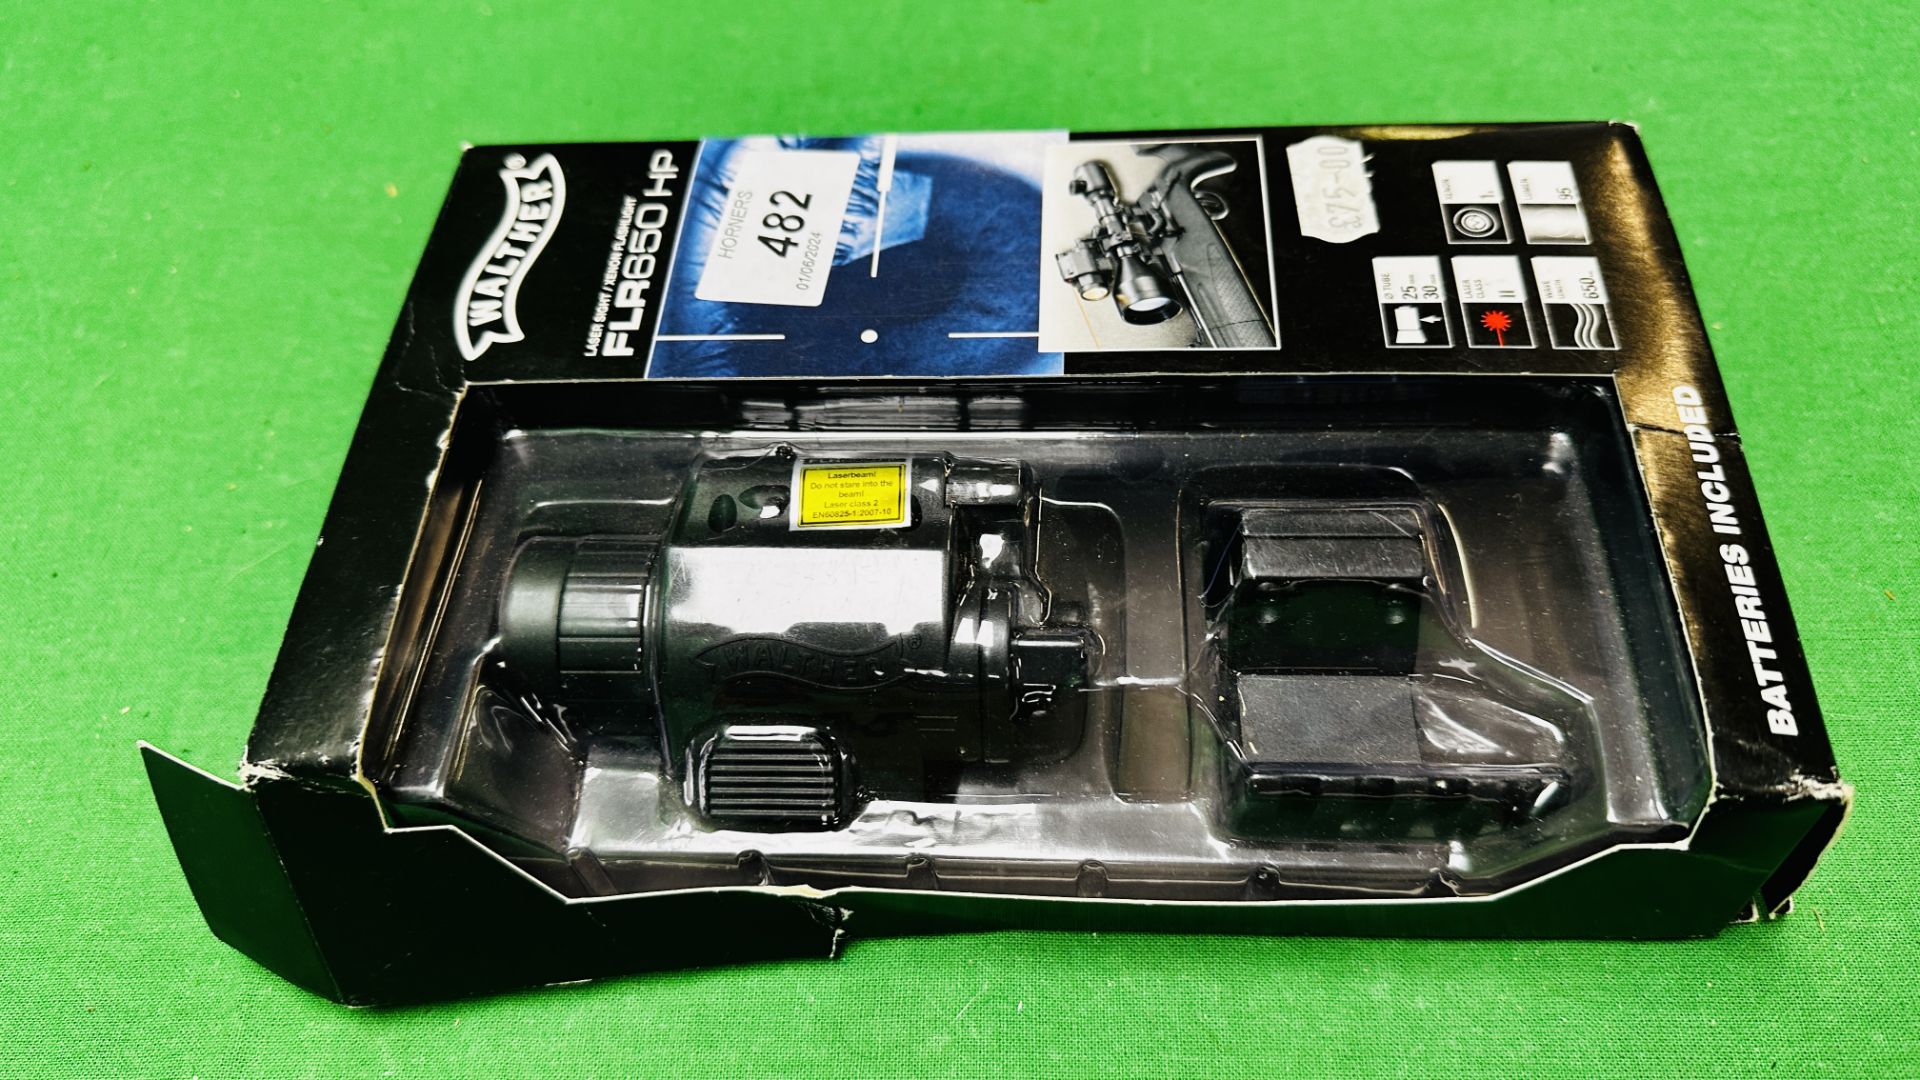 A BOXED WALTHER FLR650HP LASER SIGHT/XEON FLASHLIGHT - Image 2 of 5